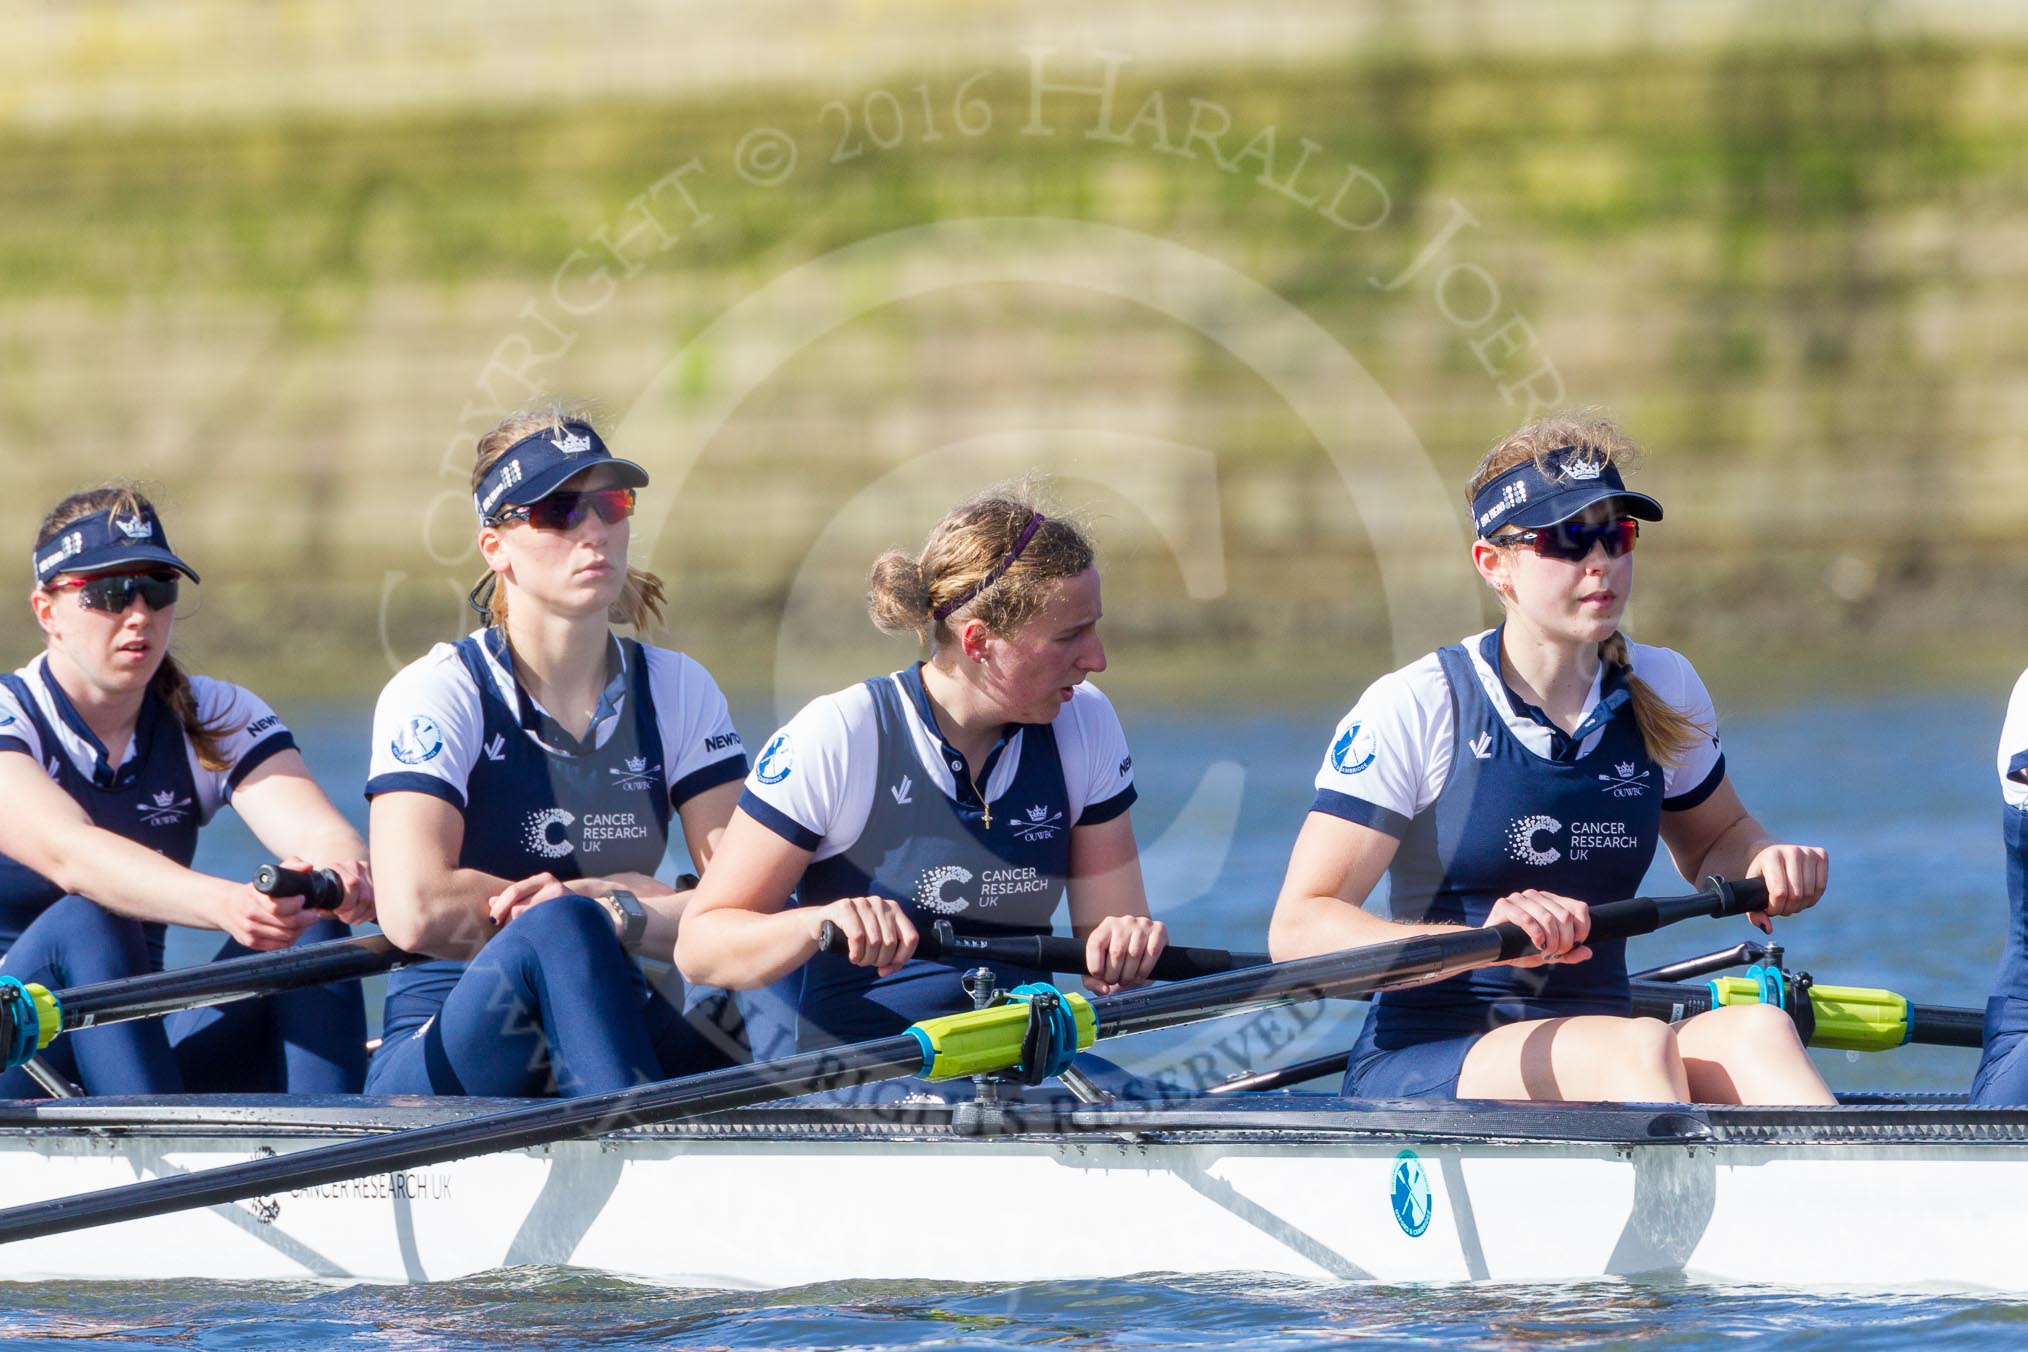 The Boat Race season 2016 -  The Cancer Research Women's Boat Race.
River Thames between Putney Bridge and Mortlake,
London SW15,

United Kingdom,
on 27 March 2016 at 14:05, image #152